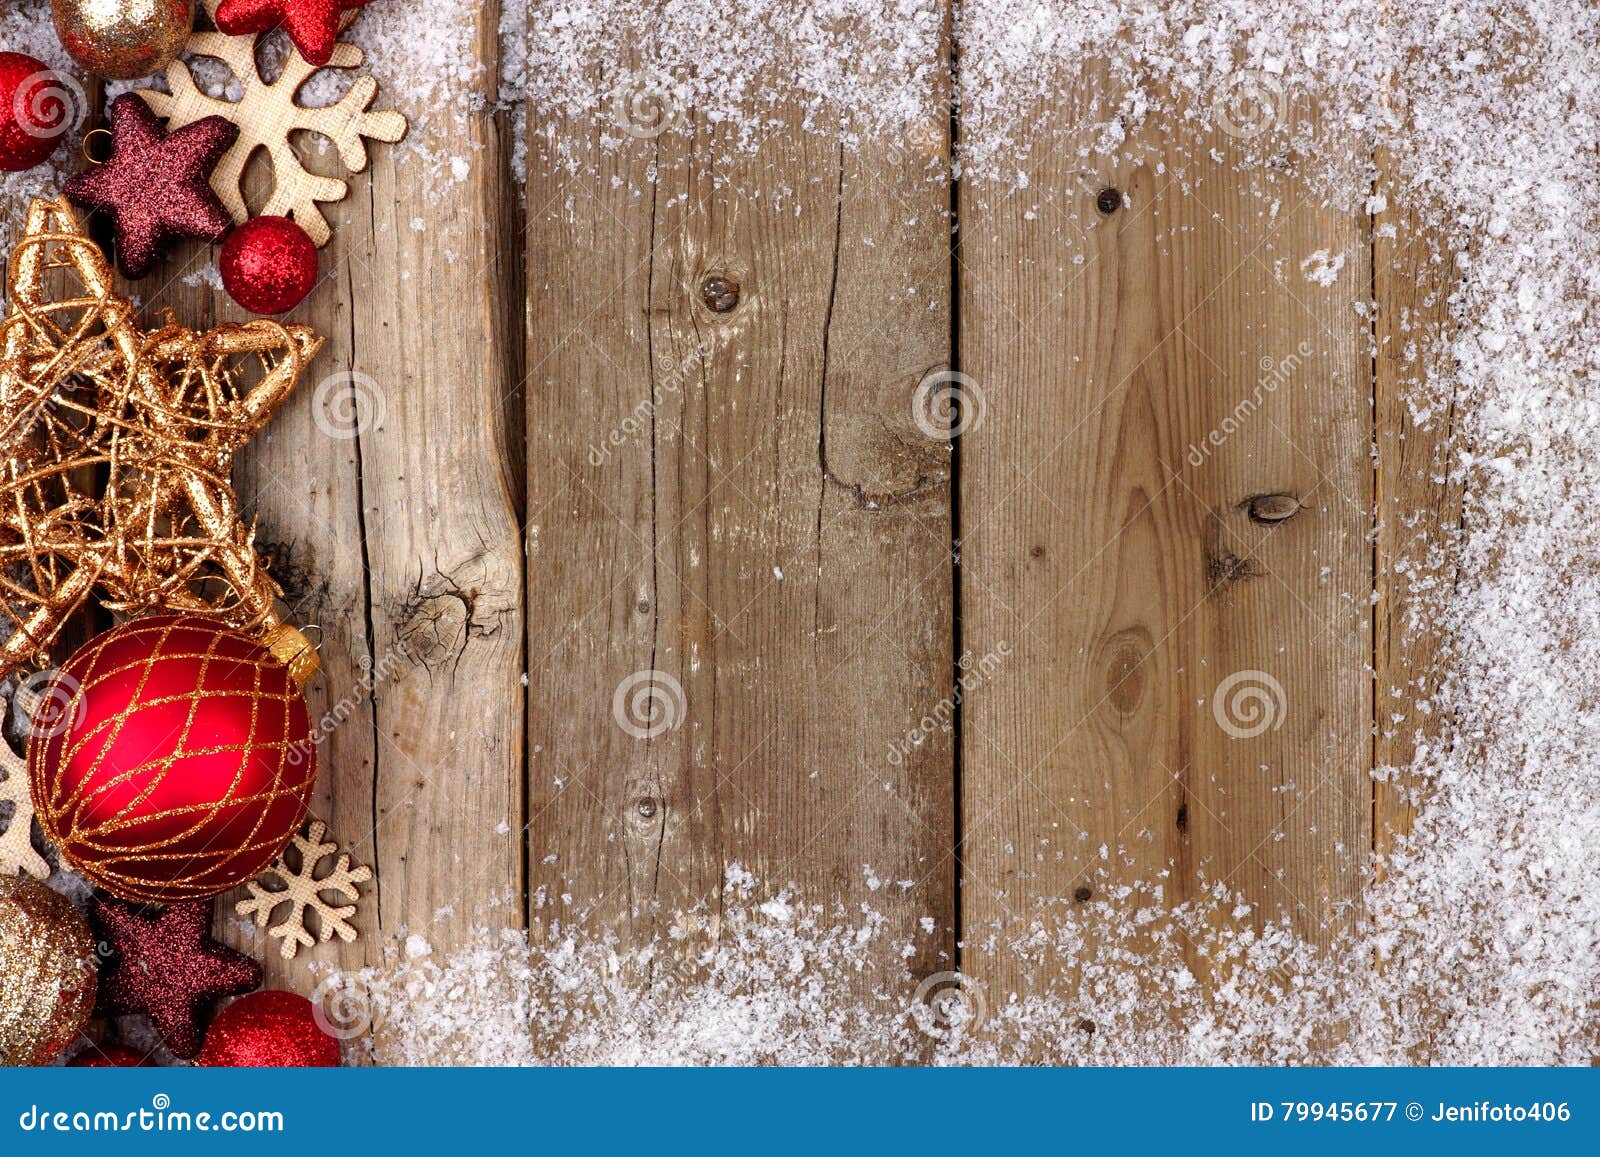 Red and Gold Christmas Side Border with Snow on Wood Stock Image ...